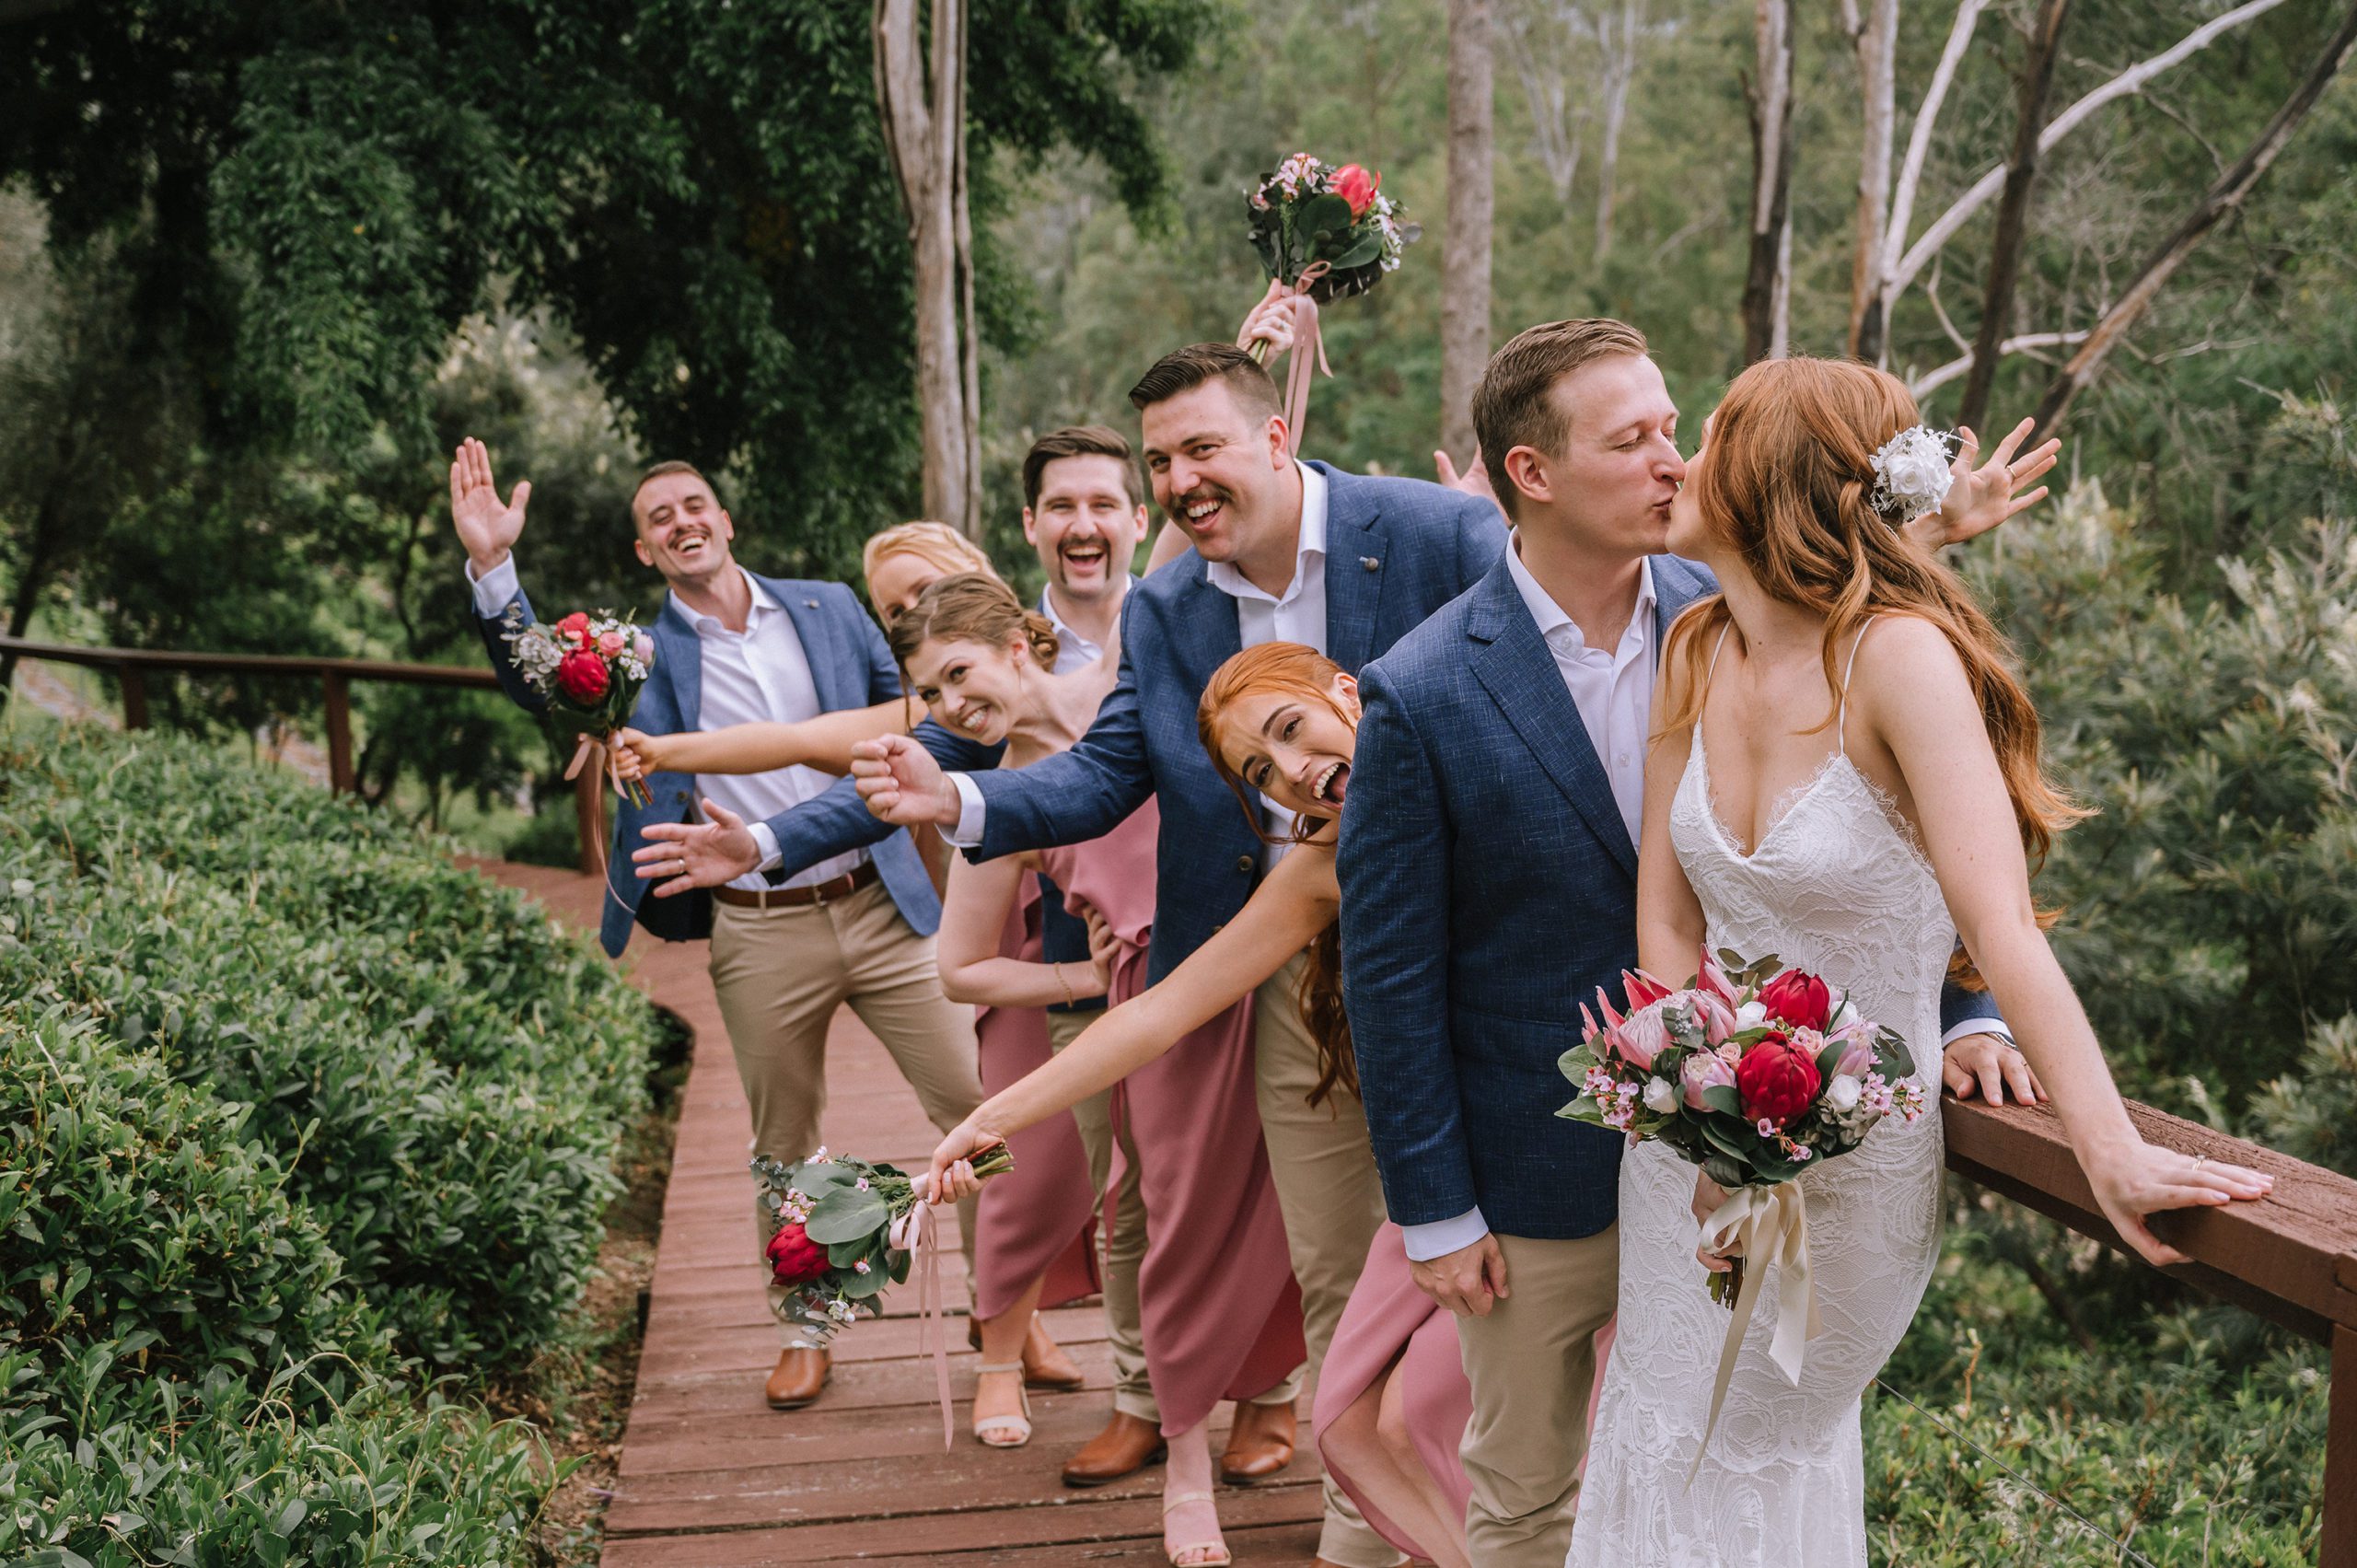 Fun and relaxed bridal party photo at hinterland Queensland wedding venue, by Tayla Jayne Photography